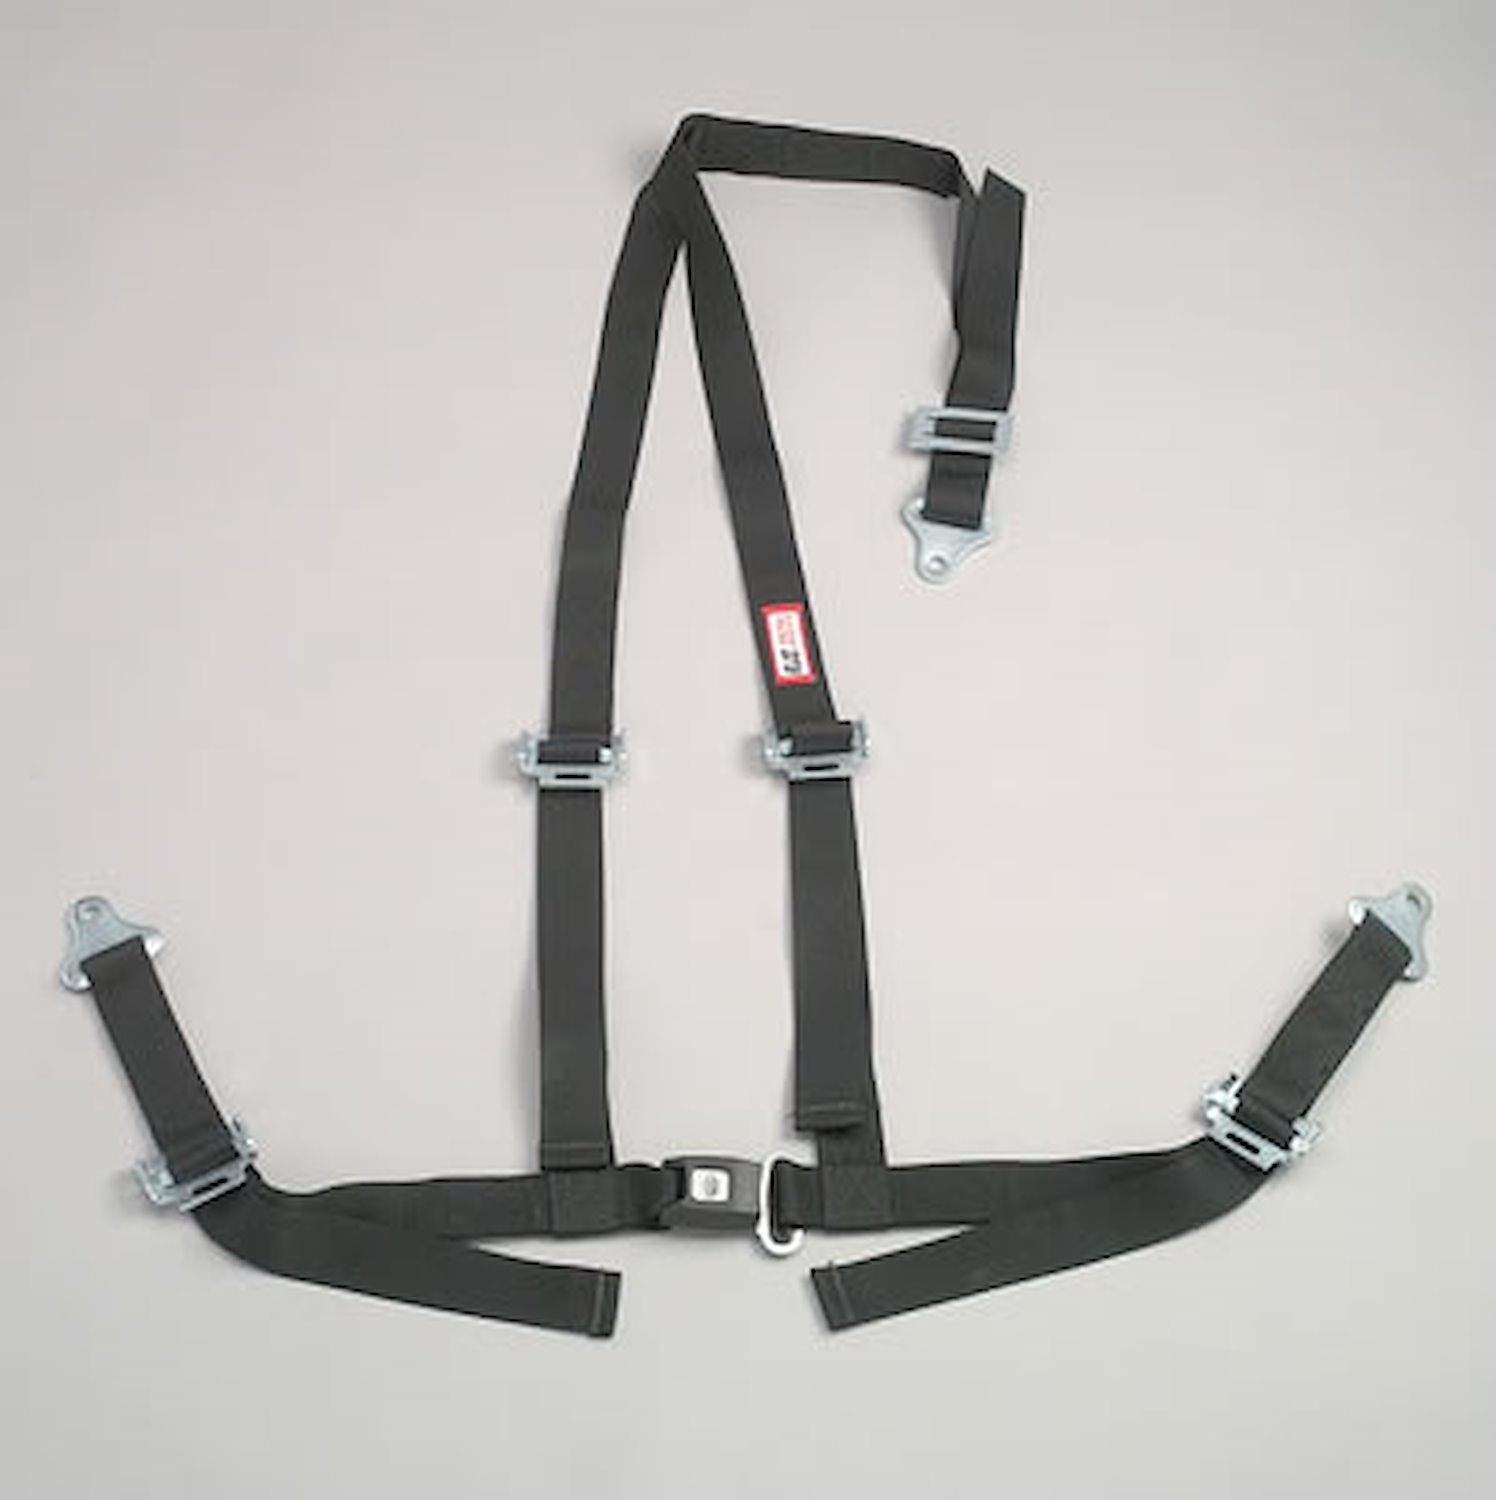 NON-SFI B&T HARNESS 2 PULL UP Lap Belt 2 S. H. V ROLL BAR Mount ALL WRAP ENDS w/STERNUM STRAP RED